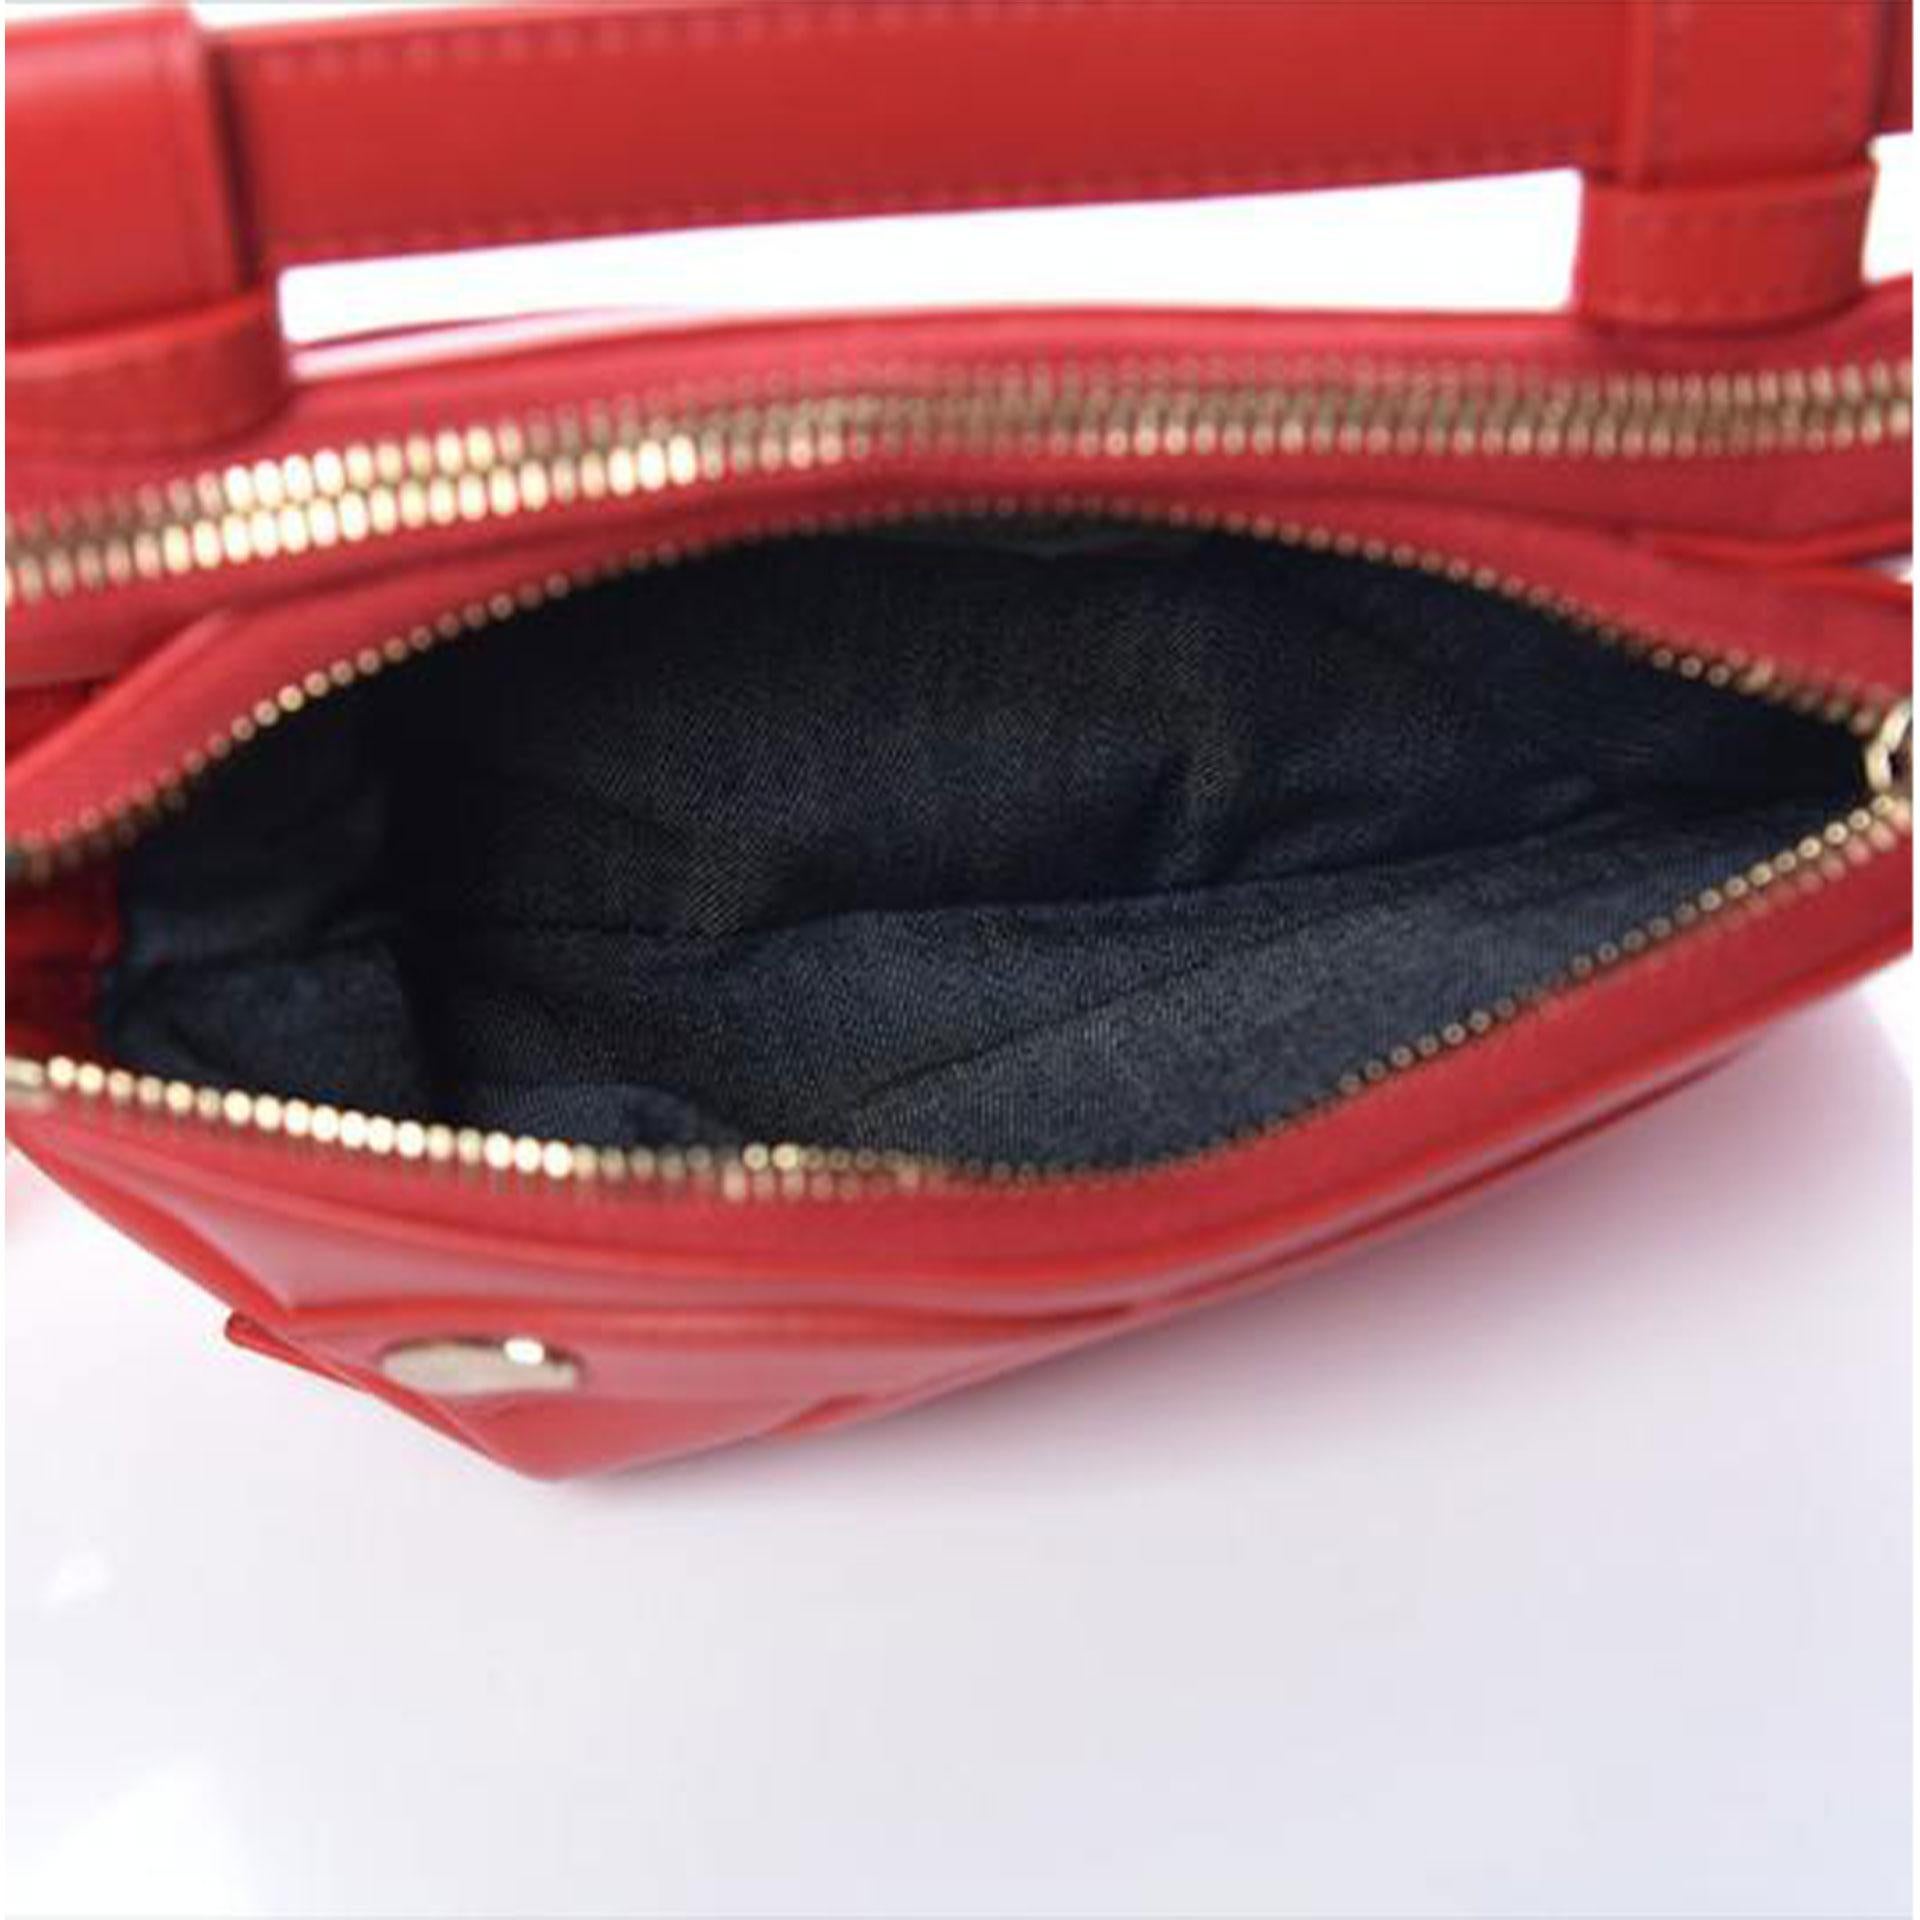 Chanel Bum Red Lambskin Fanny Pack Waist Belt Leather Bag In Good Condition For Sale In Miami, FL